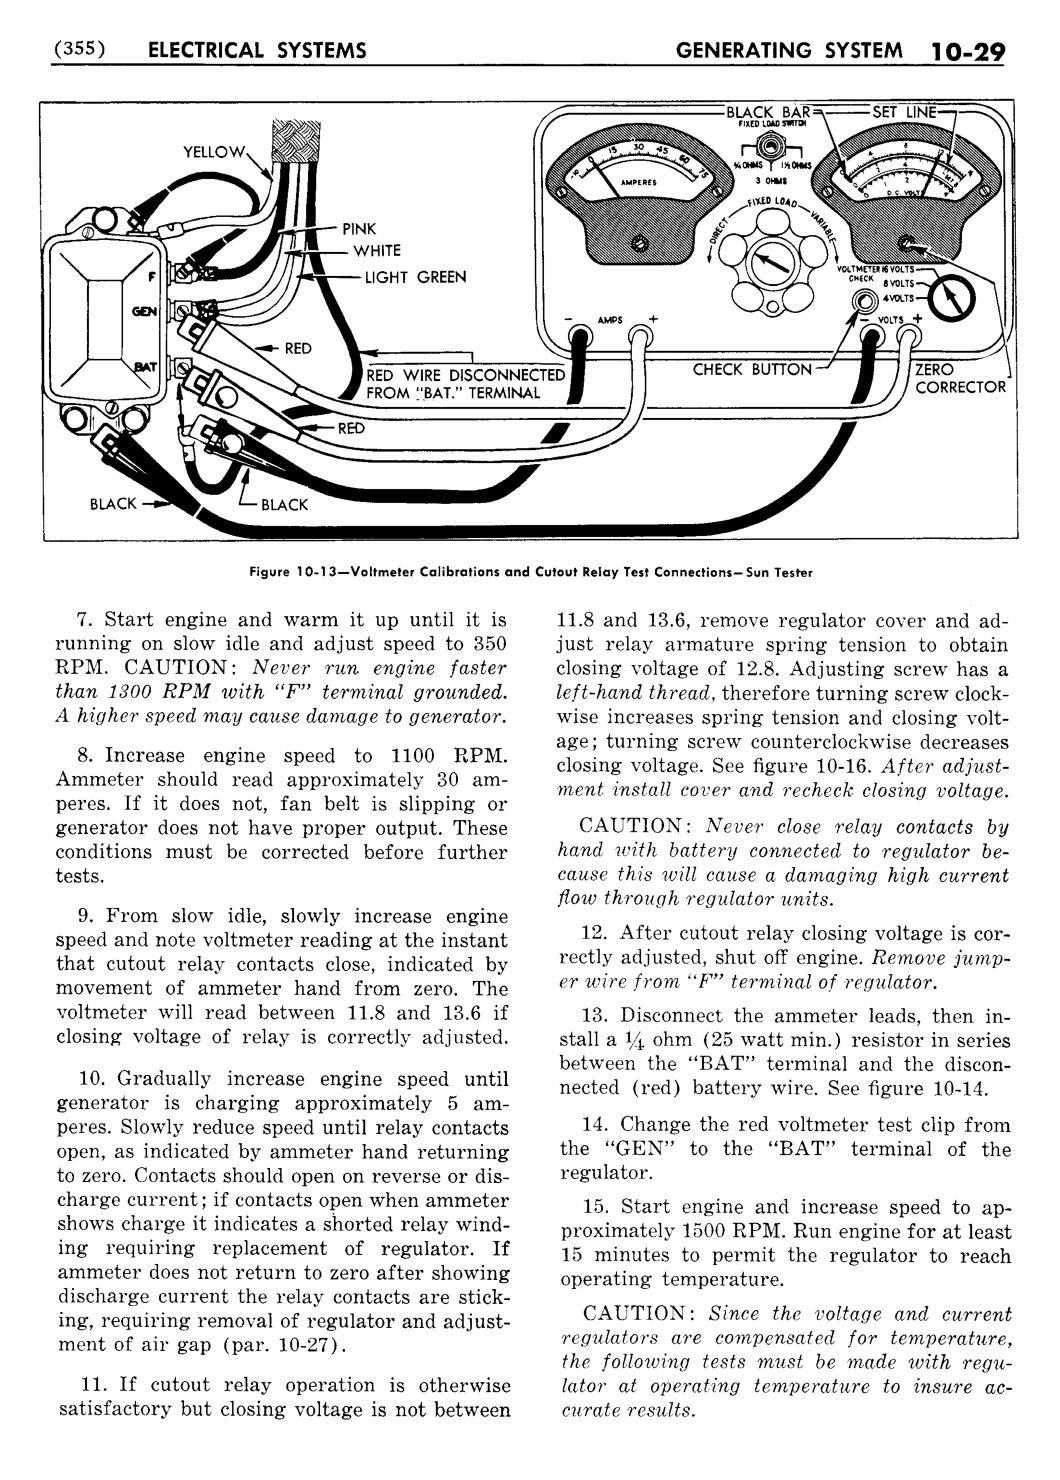 n_11 1956 Buick Shop Manual - Electrical Systems-029-029.jpg